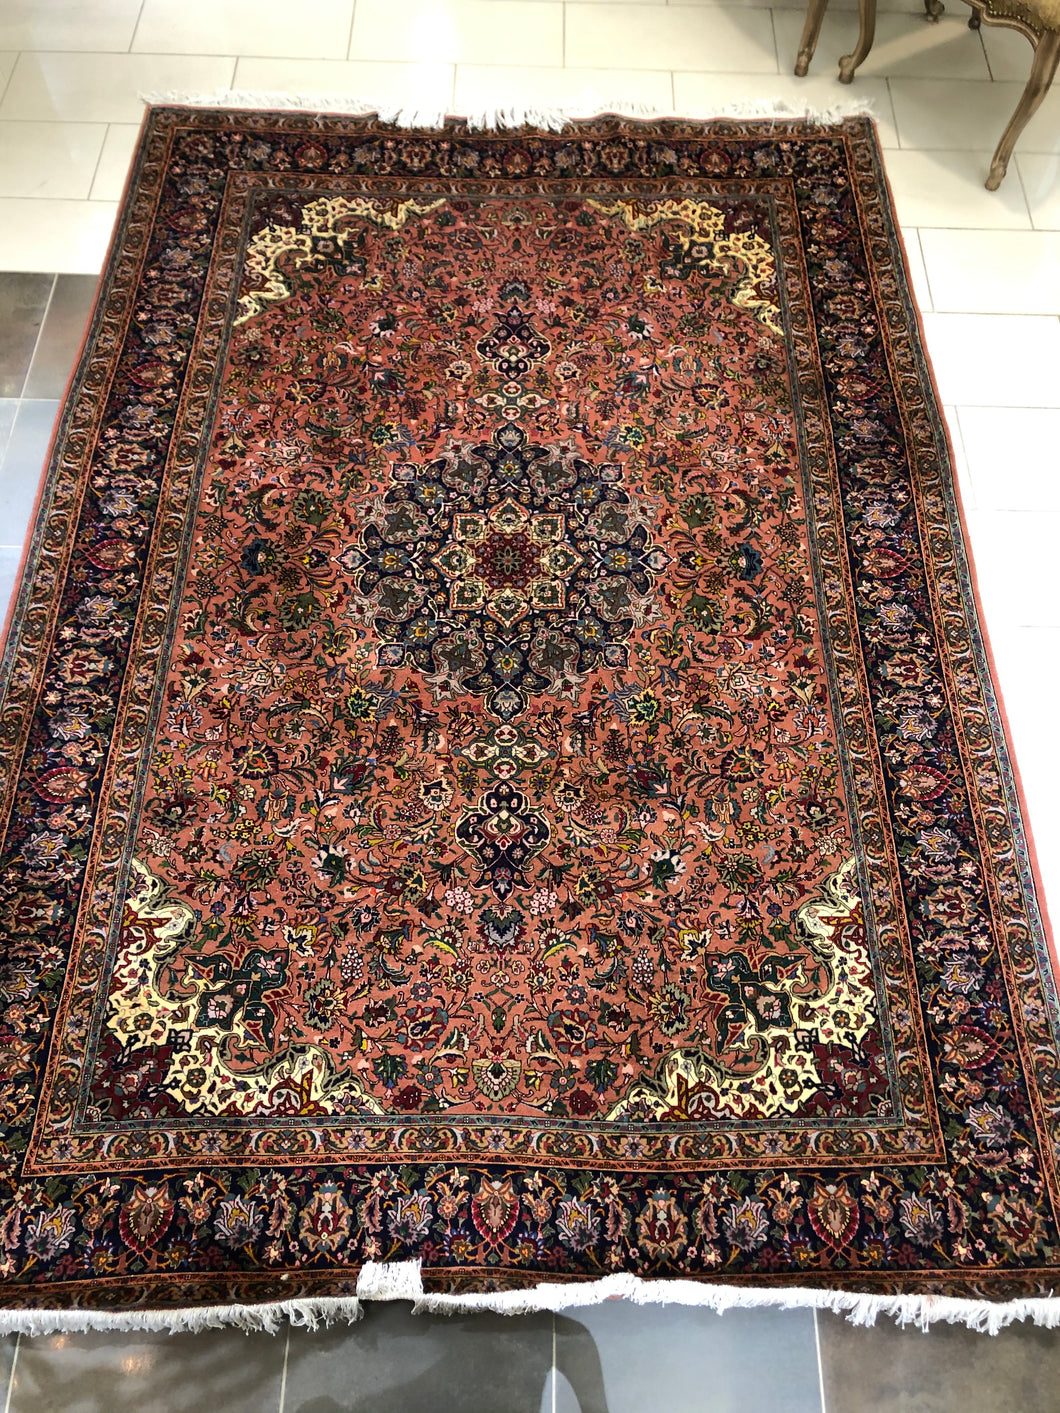 Tabriz Rug Rose Ivory Navy 7' X 10' - Sold Out of Stock